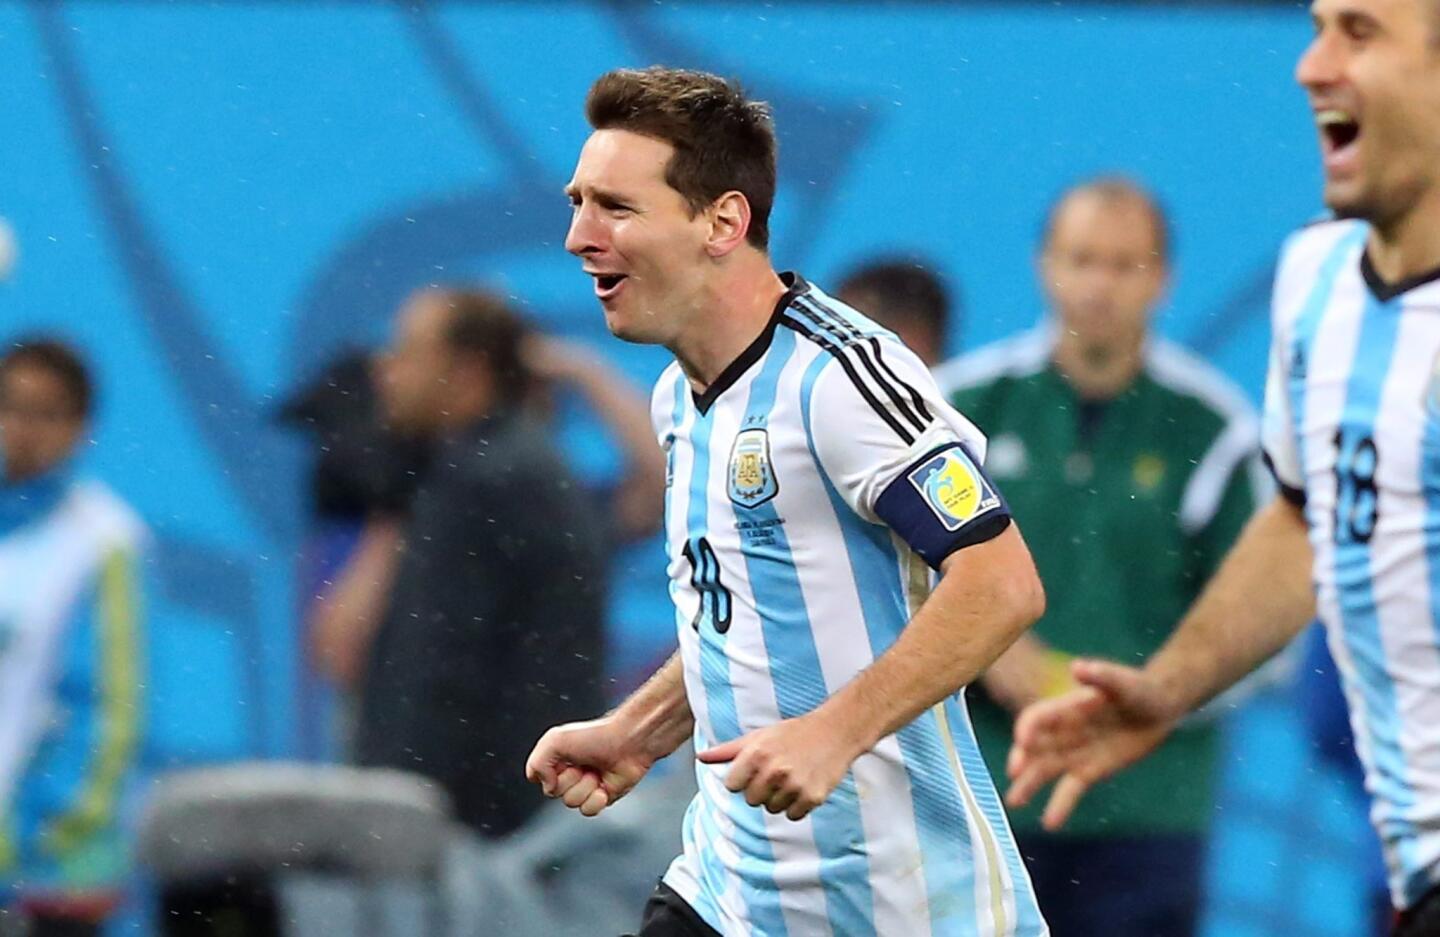 Argentina's Lionel Messi celebrates after his team wins the penalty shootout against the Netherlands to advance to the World Cup final.